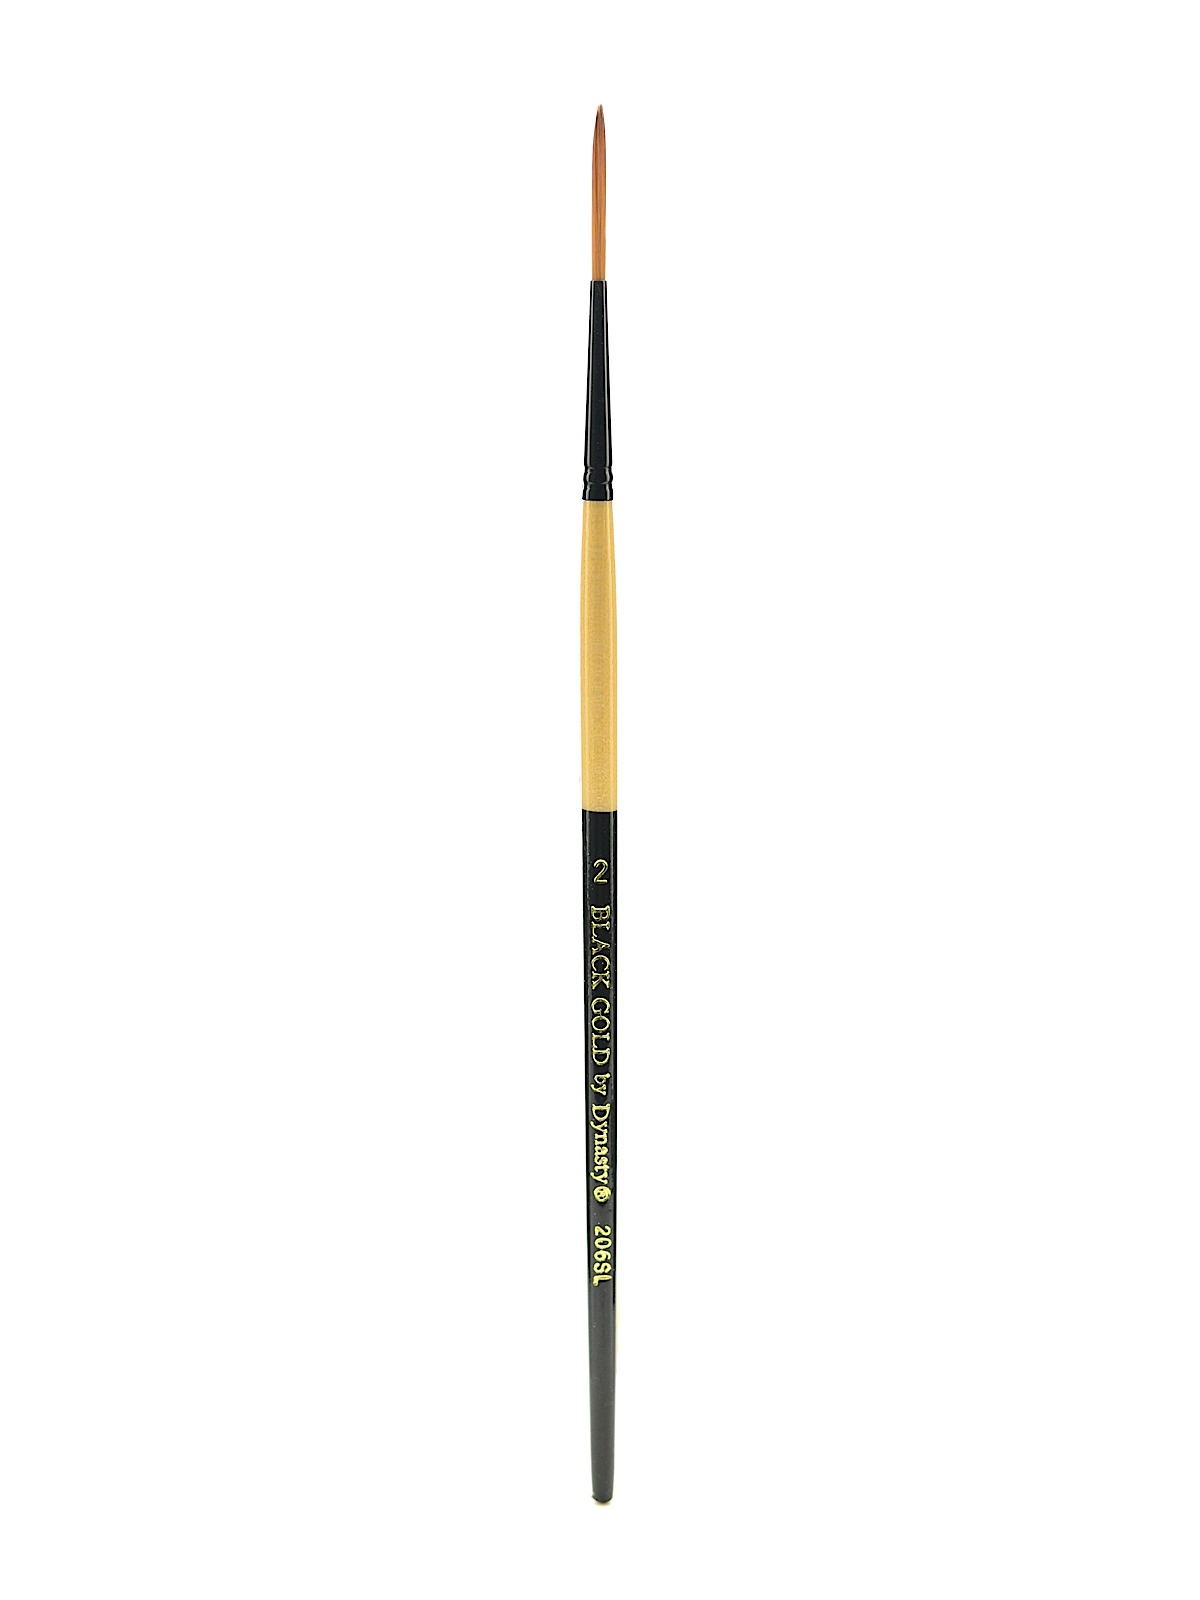 Black Gold Series Synthetic Brushes Short Handle 2 Script Liner